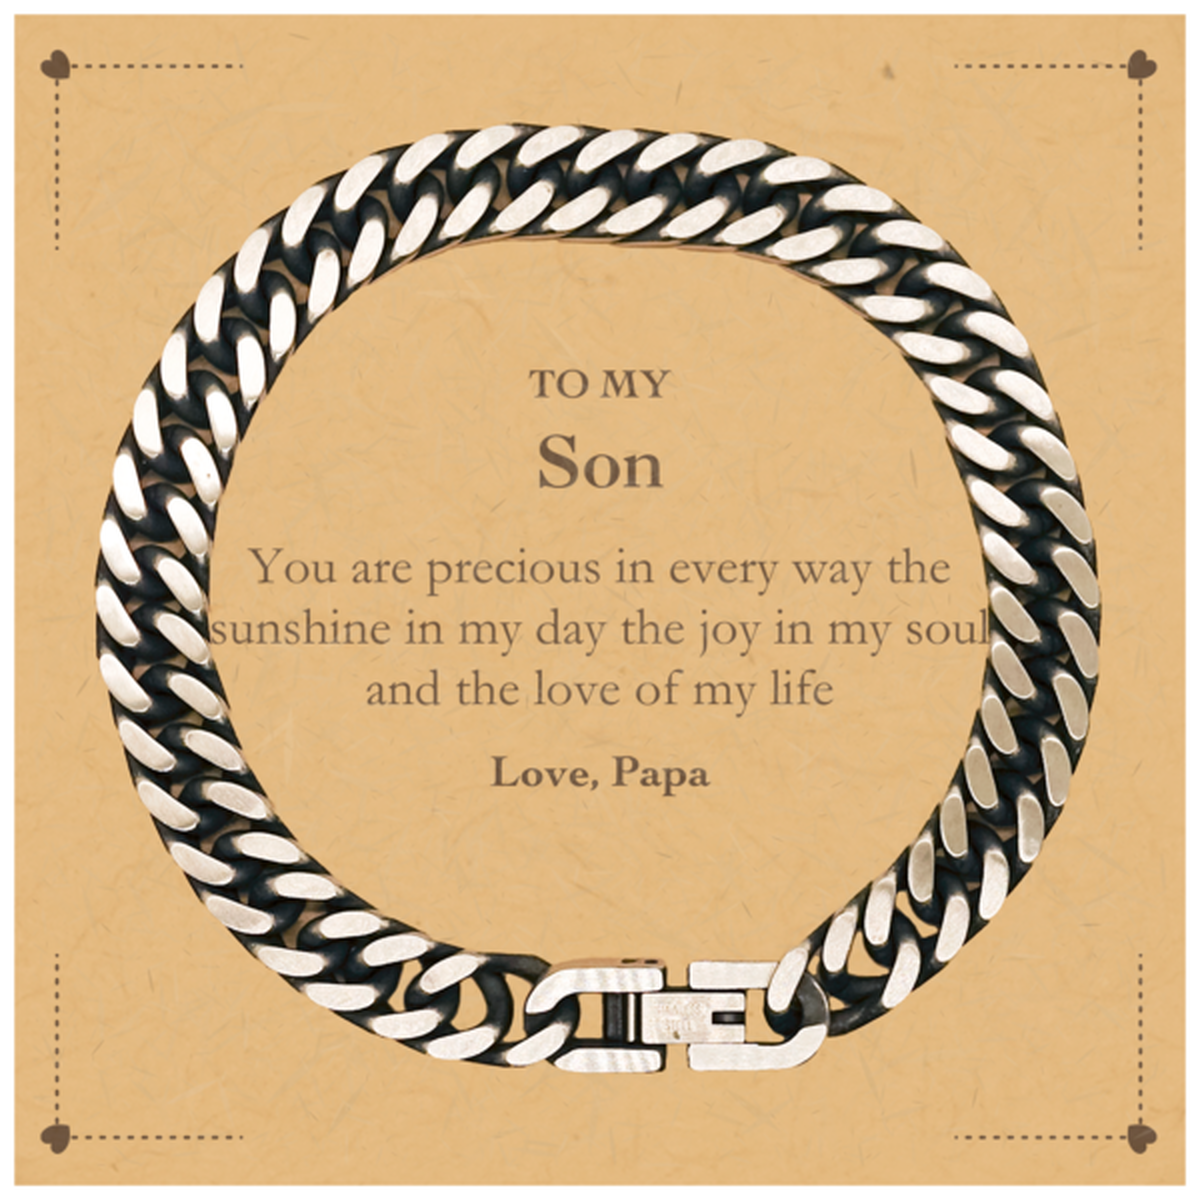 Graduation Gifts for Son Cuban Link Chain Bracelet Present from Papa, Christmas Son Birthday Gifts Son You are precious in every way the sunshine in my day. Love, Papa